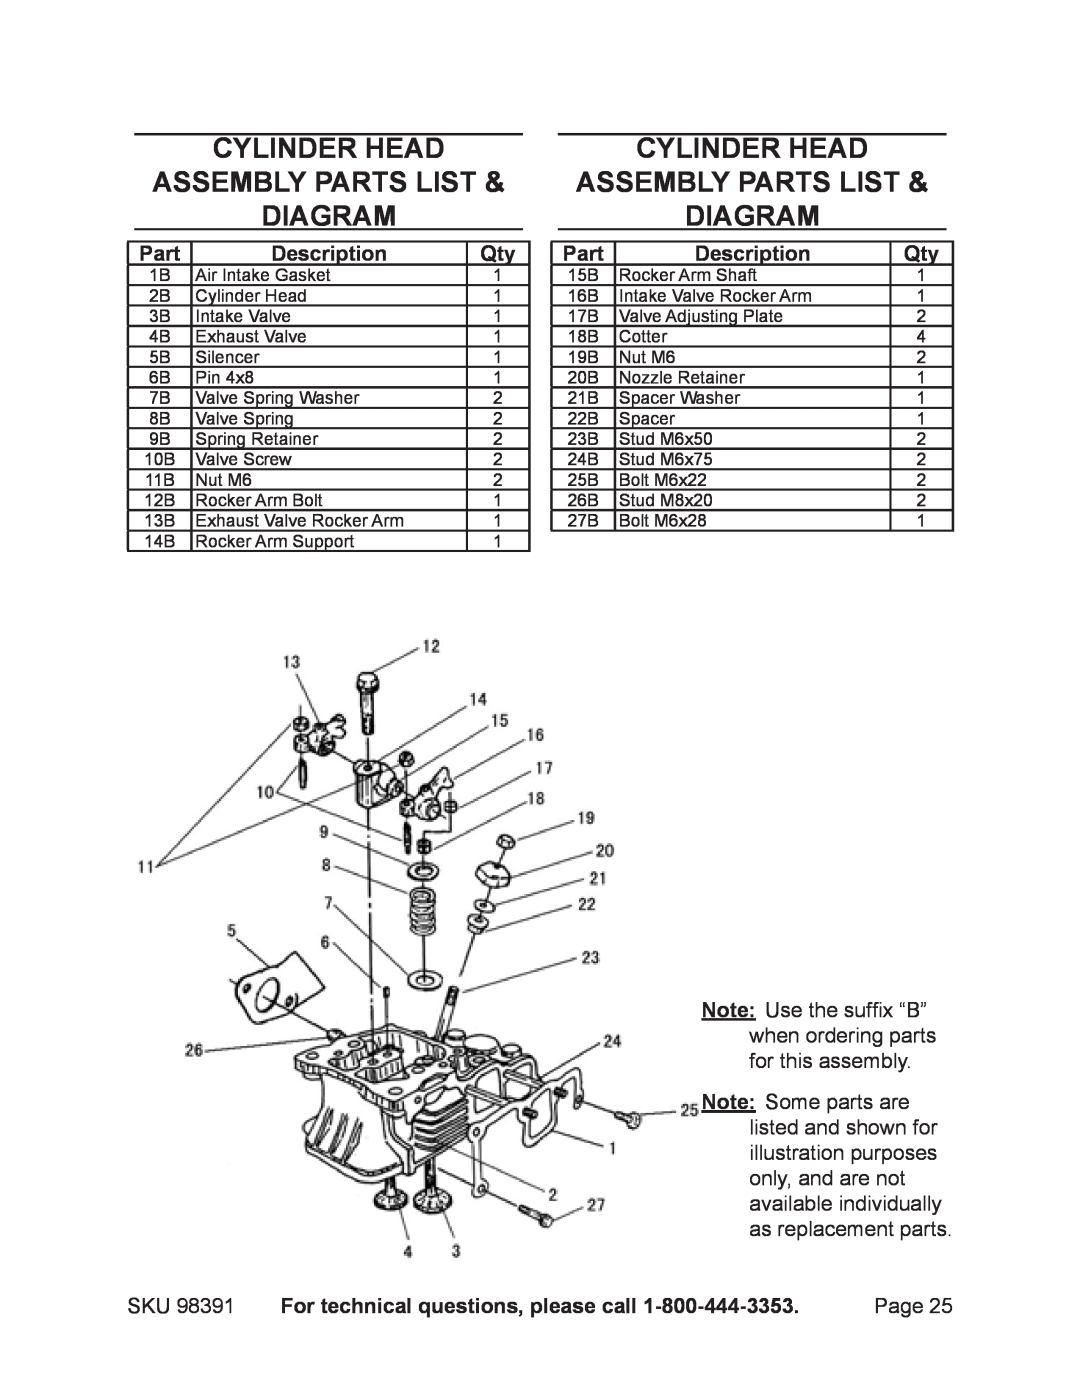 Chicago Electric 98391 Cylinder head assembly PARTS LIST diagram, Part, Description, For technical questions, please call 